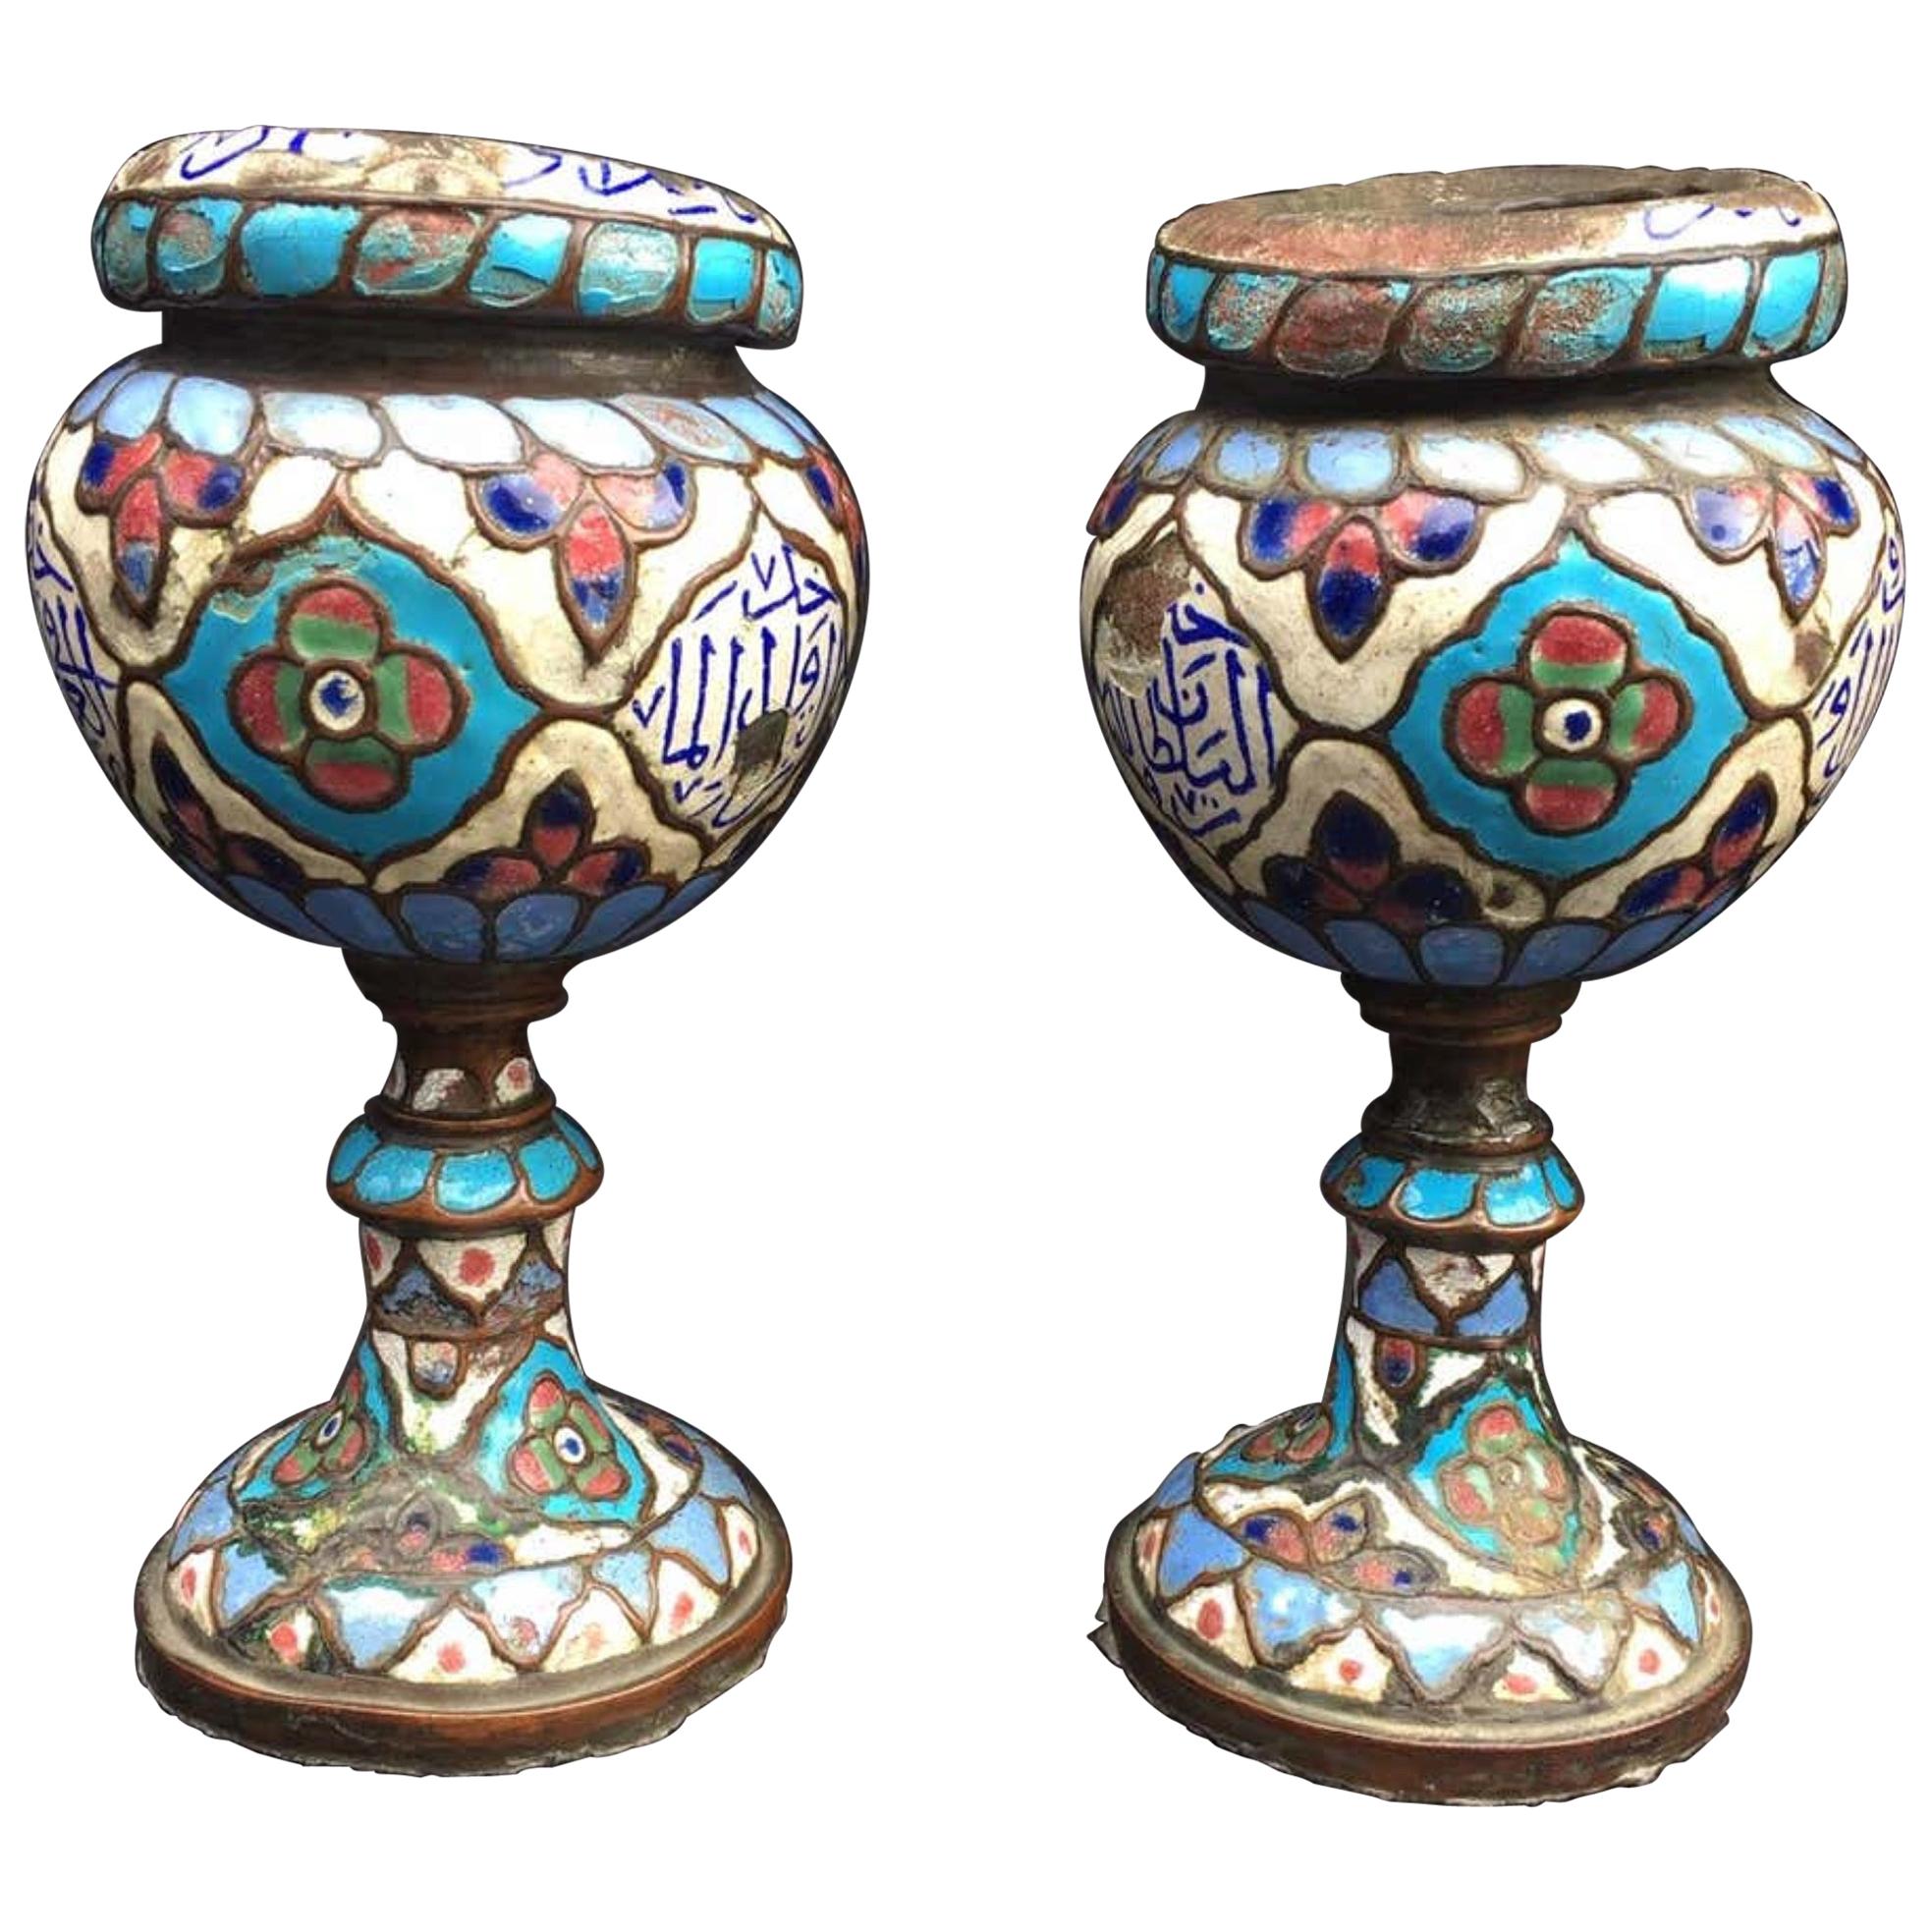 Pair of Islamic Enameled Vessels, Ancient Urns